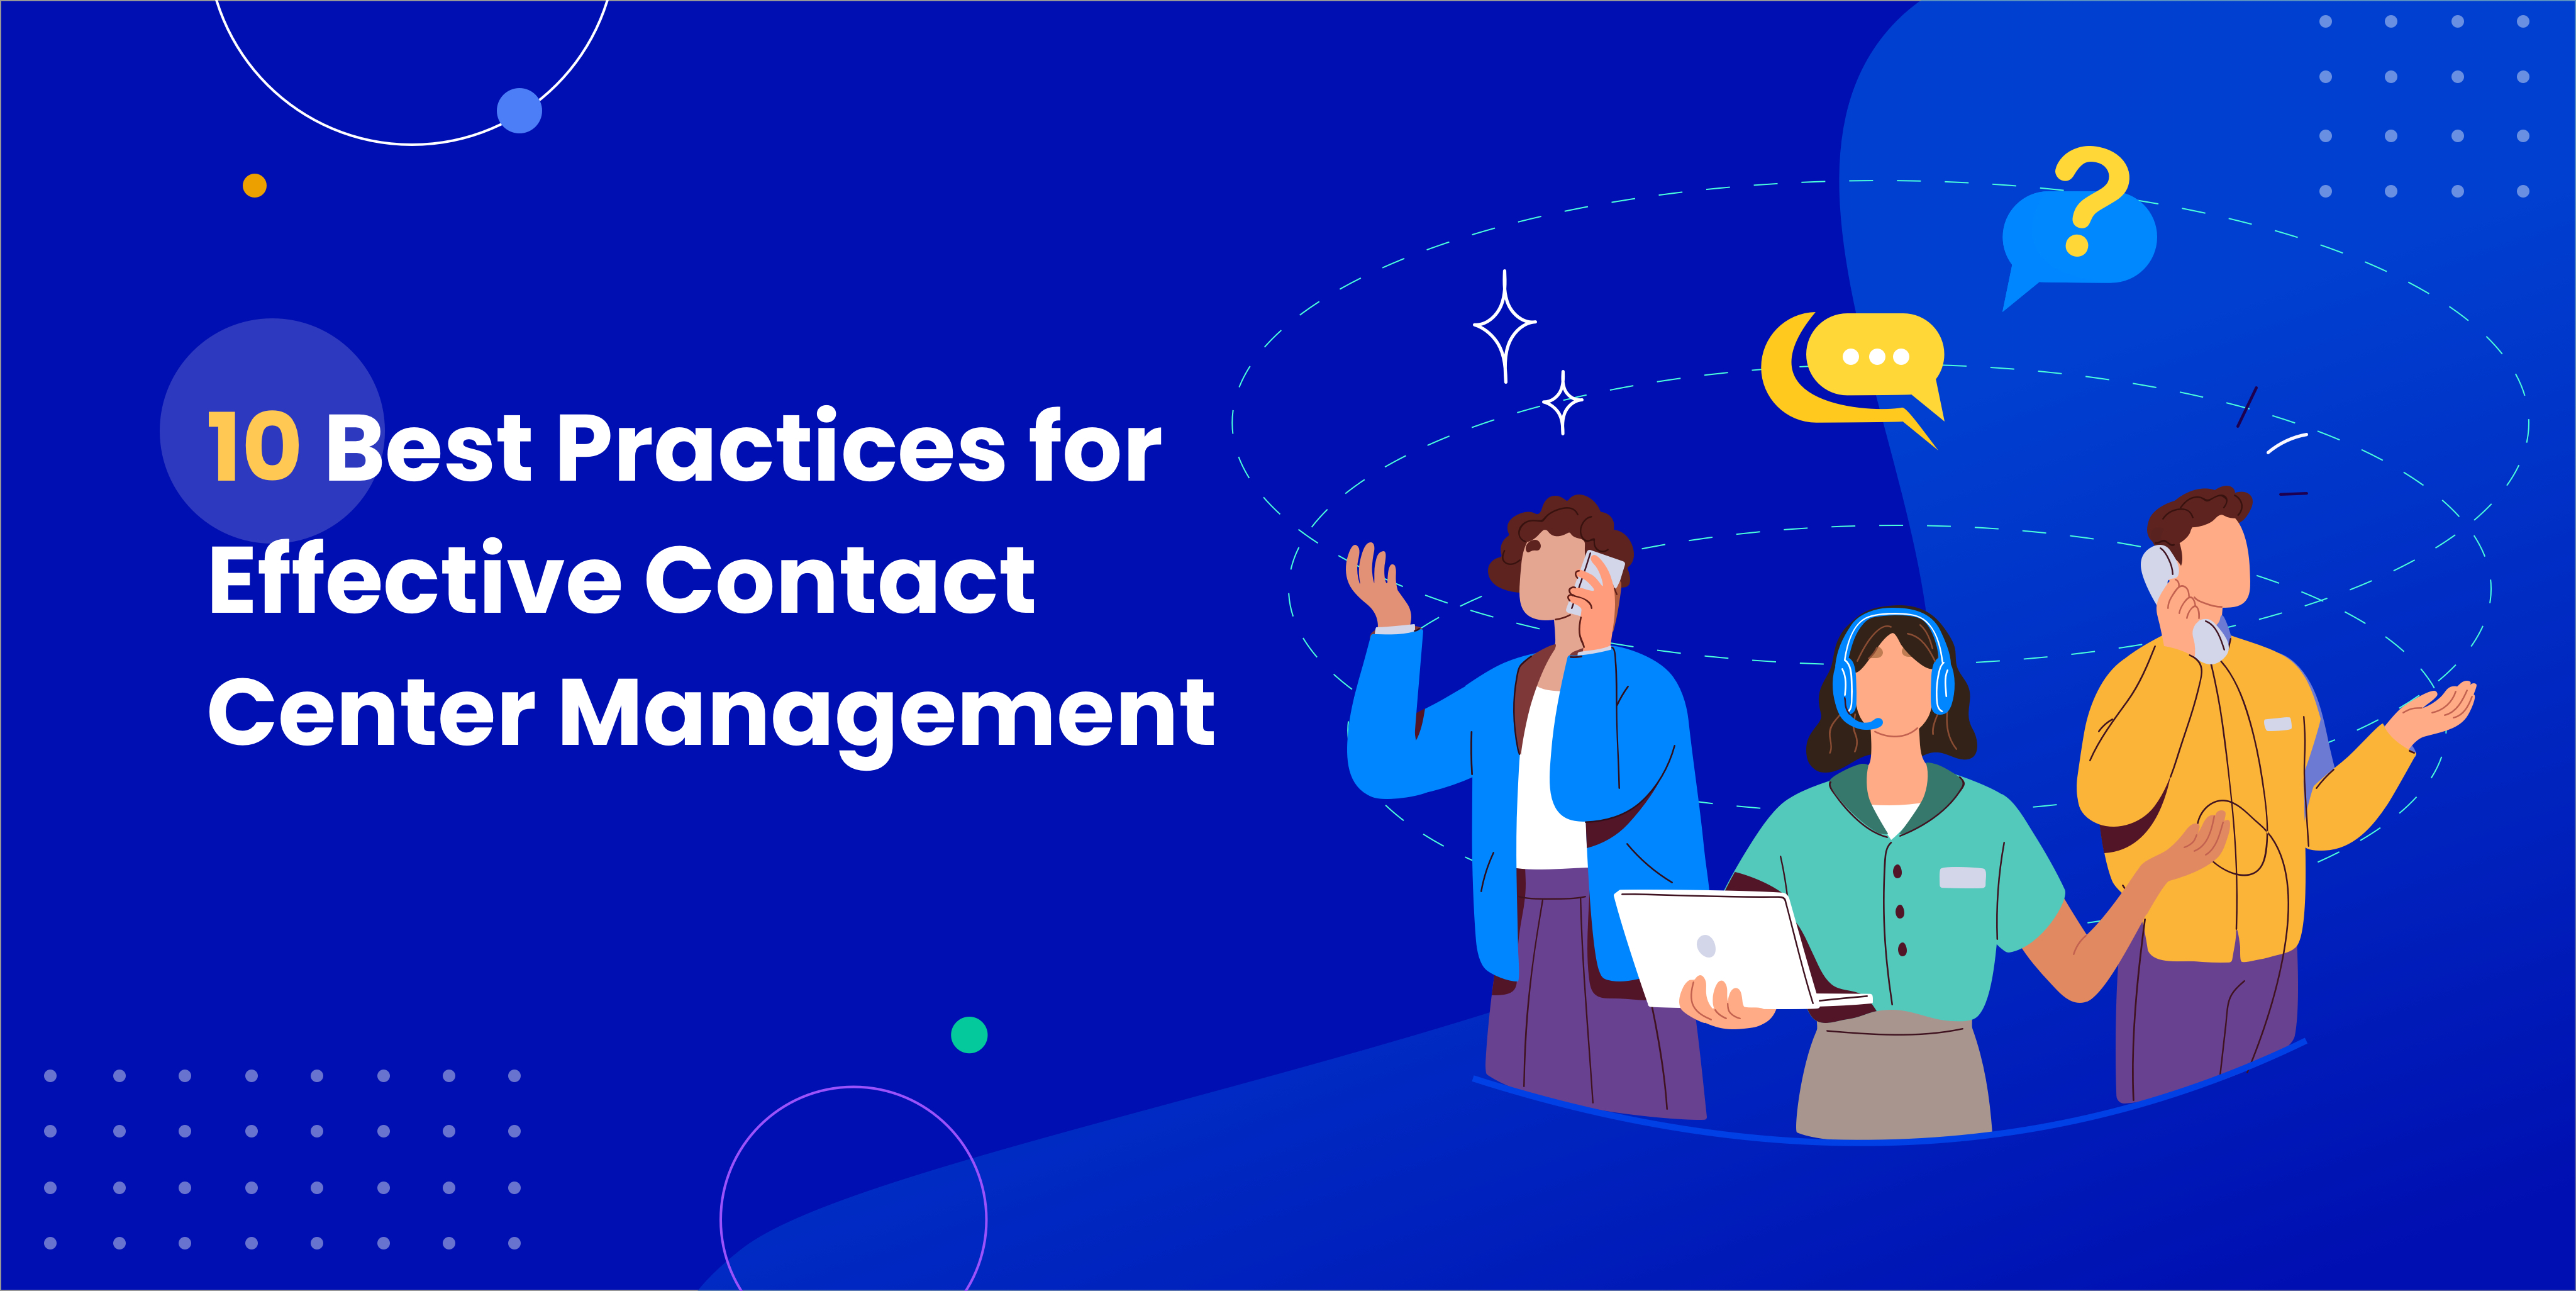 10 Tips for Better Contact Center Management | Contacto Blog